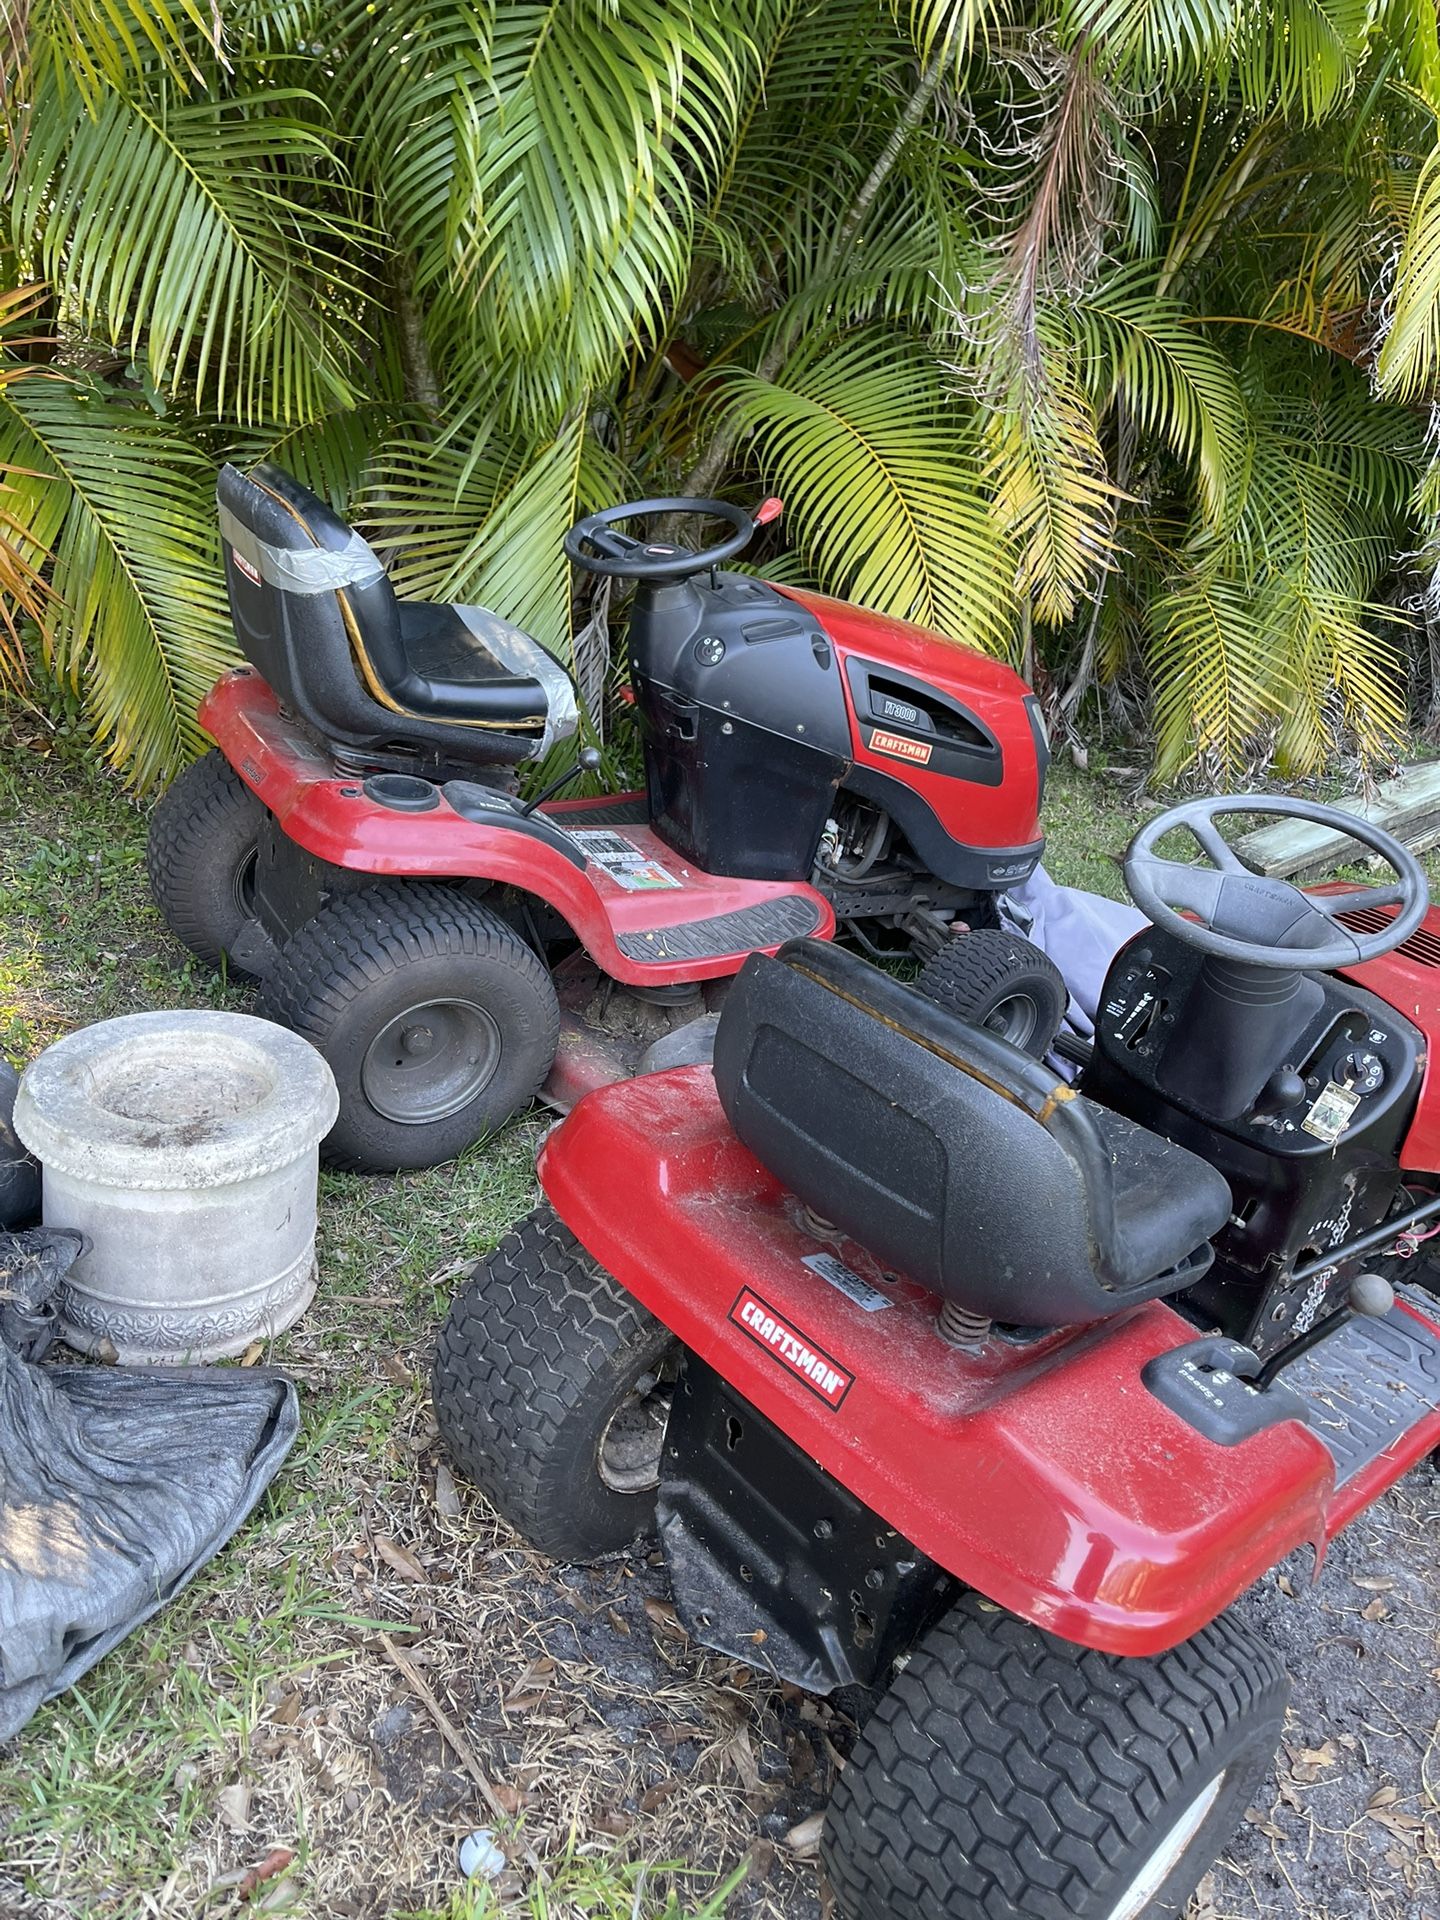  2 Craftsman Riding Lawn Mowers (Best Offer)